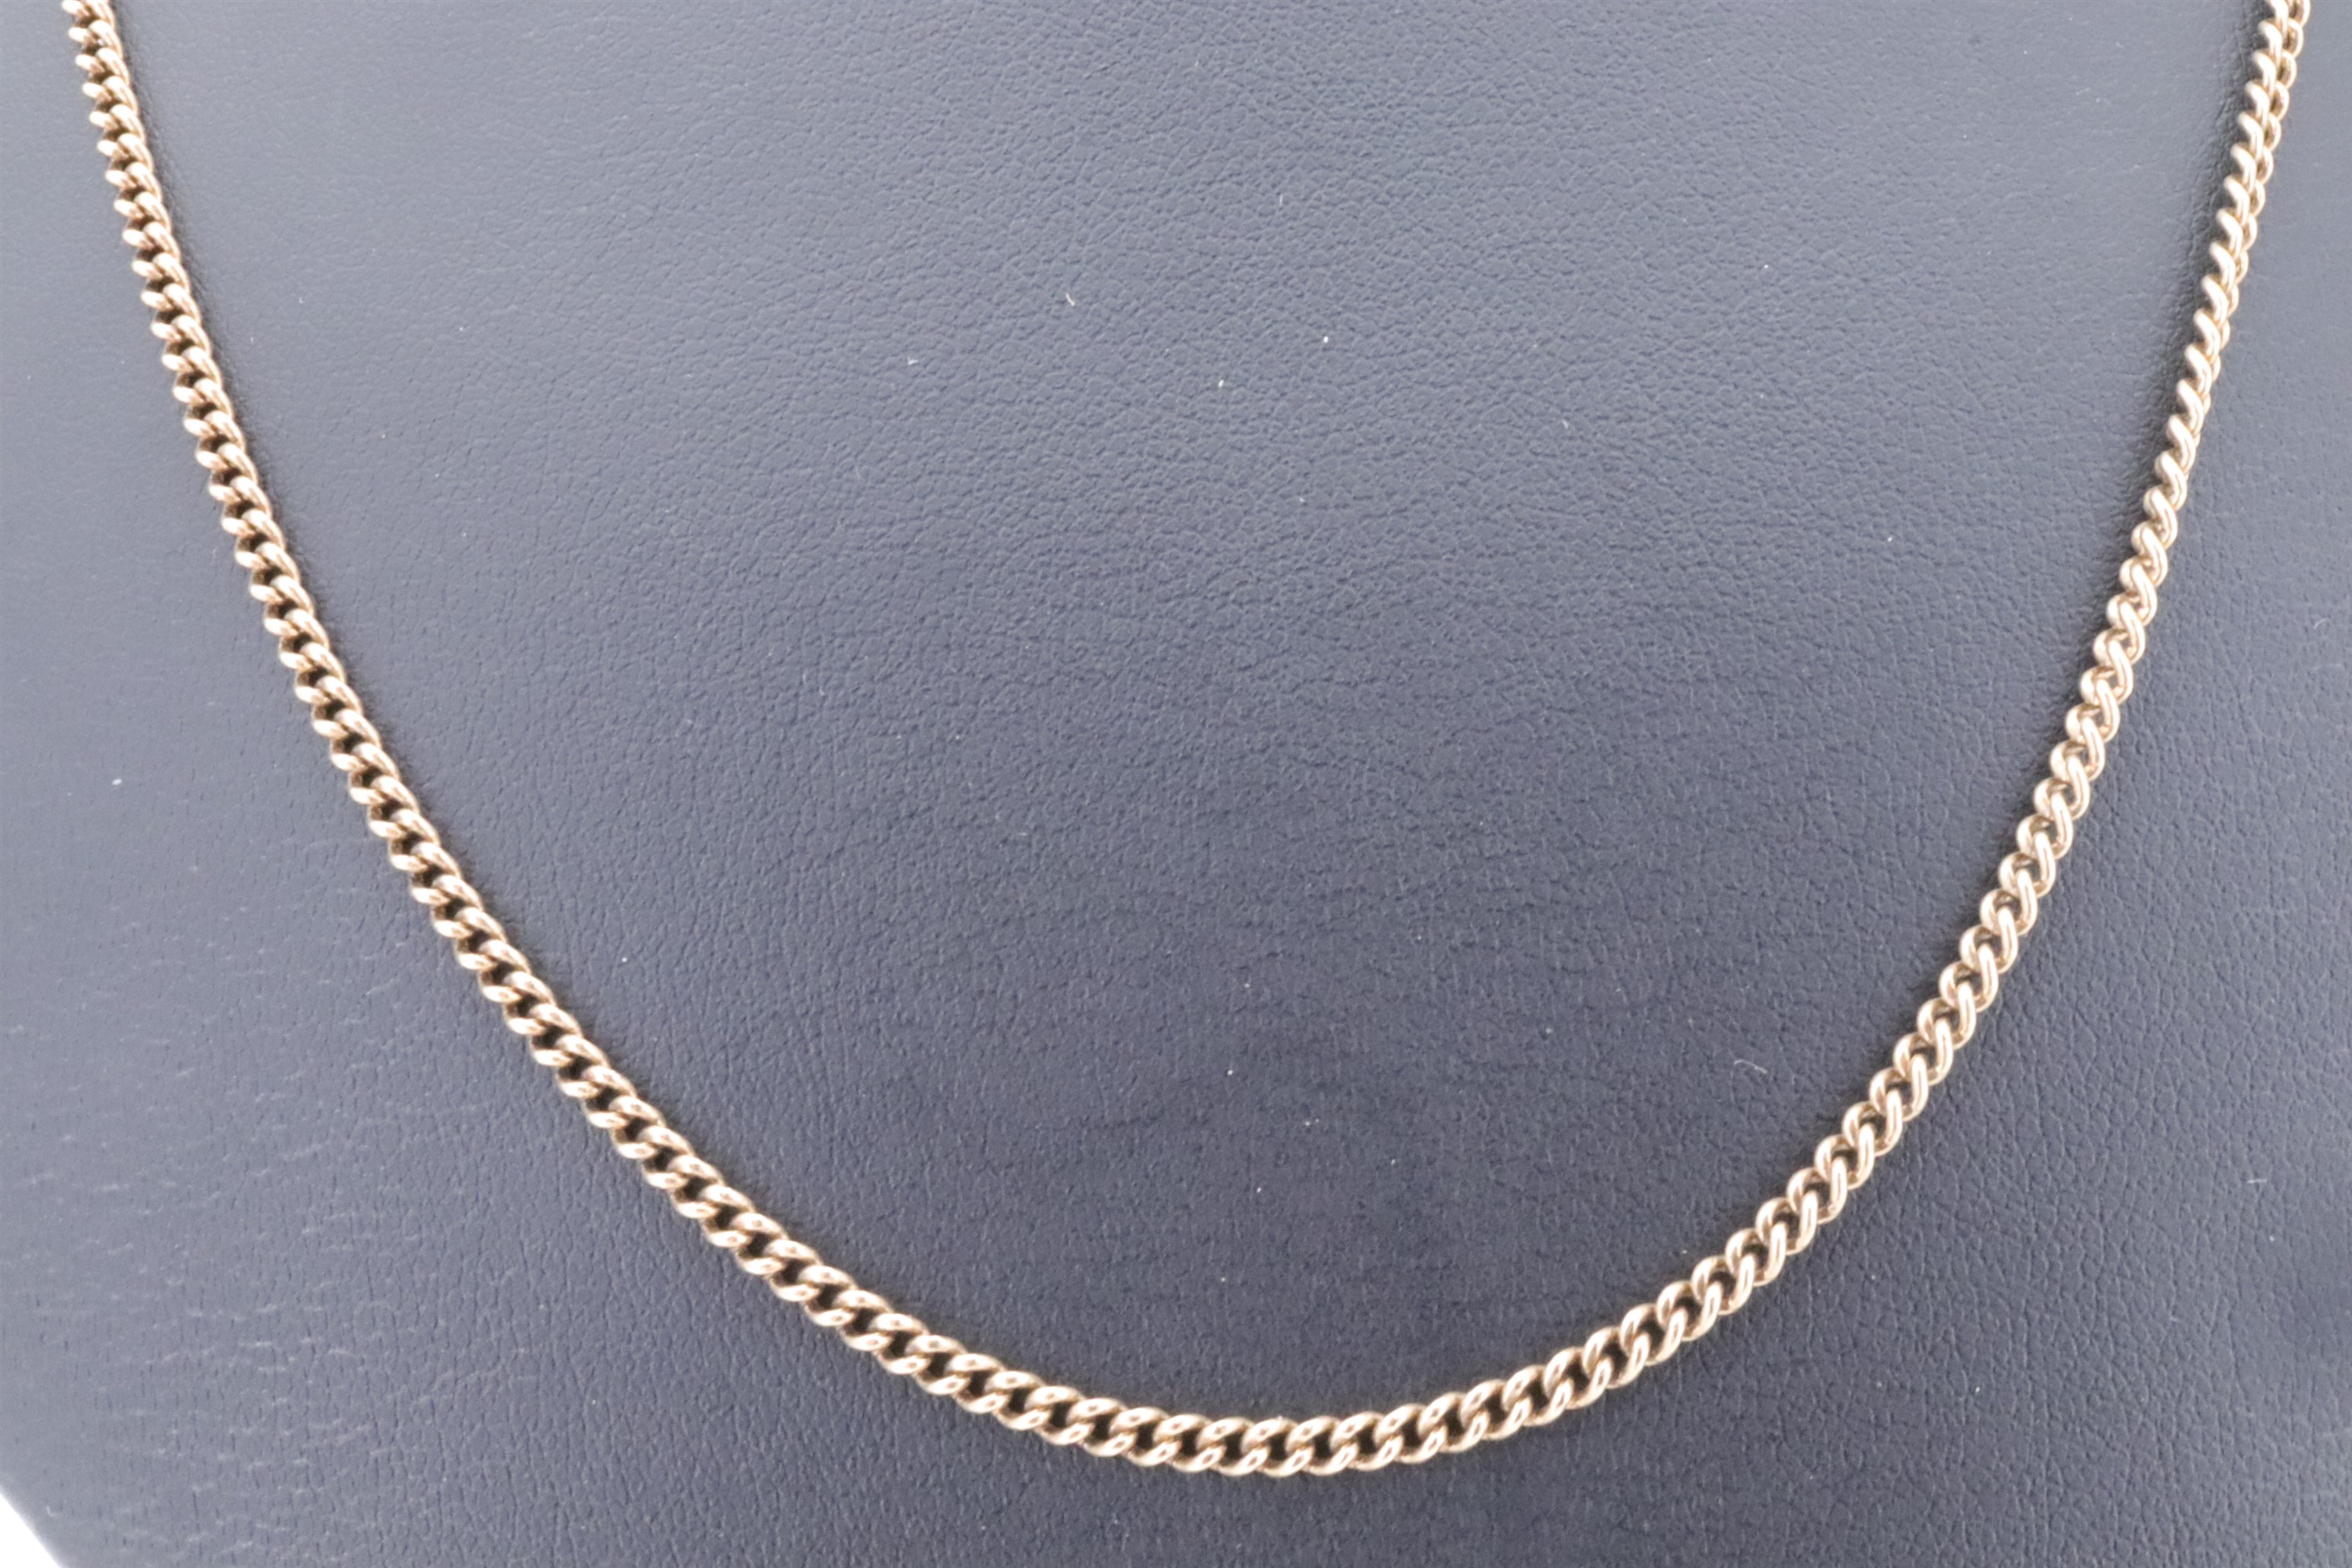 A 9 ct gold matinee length curb link necklace, 53 cm, 9.1 g - Image 2 of 3